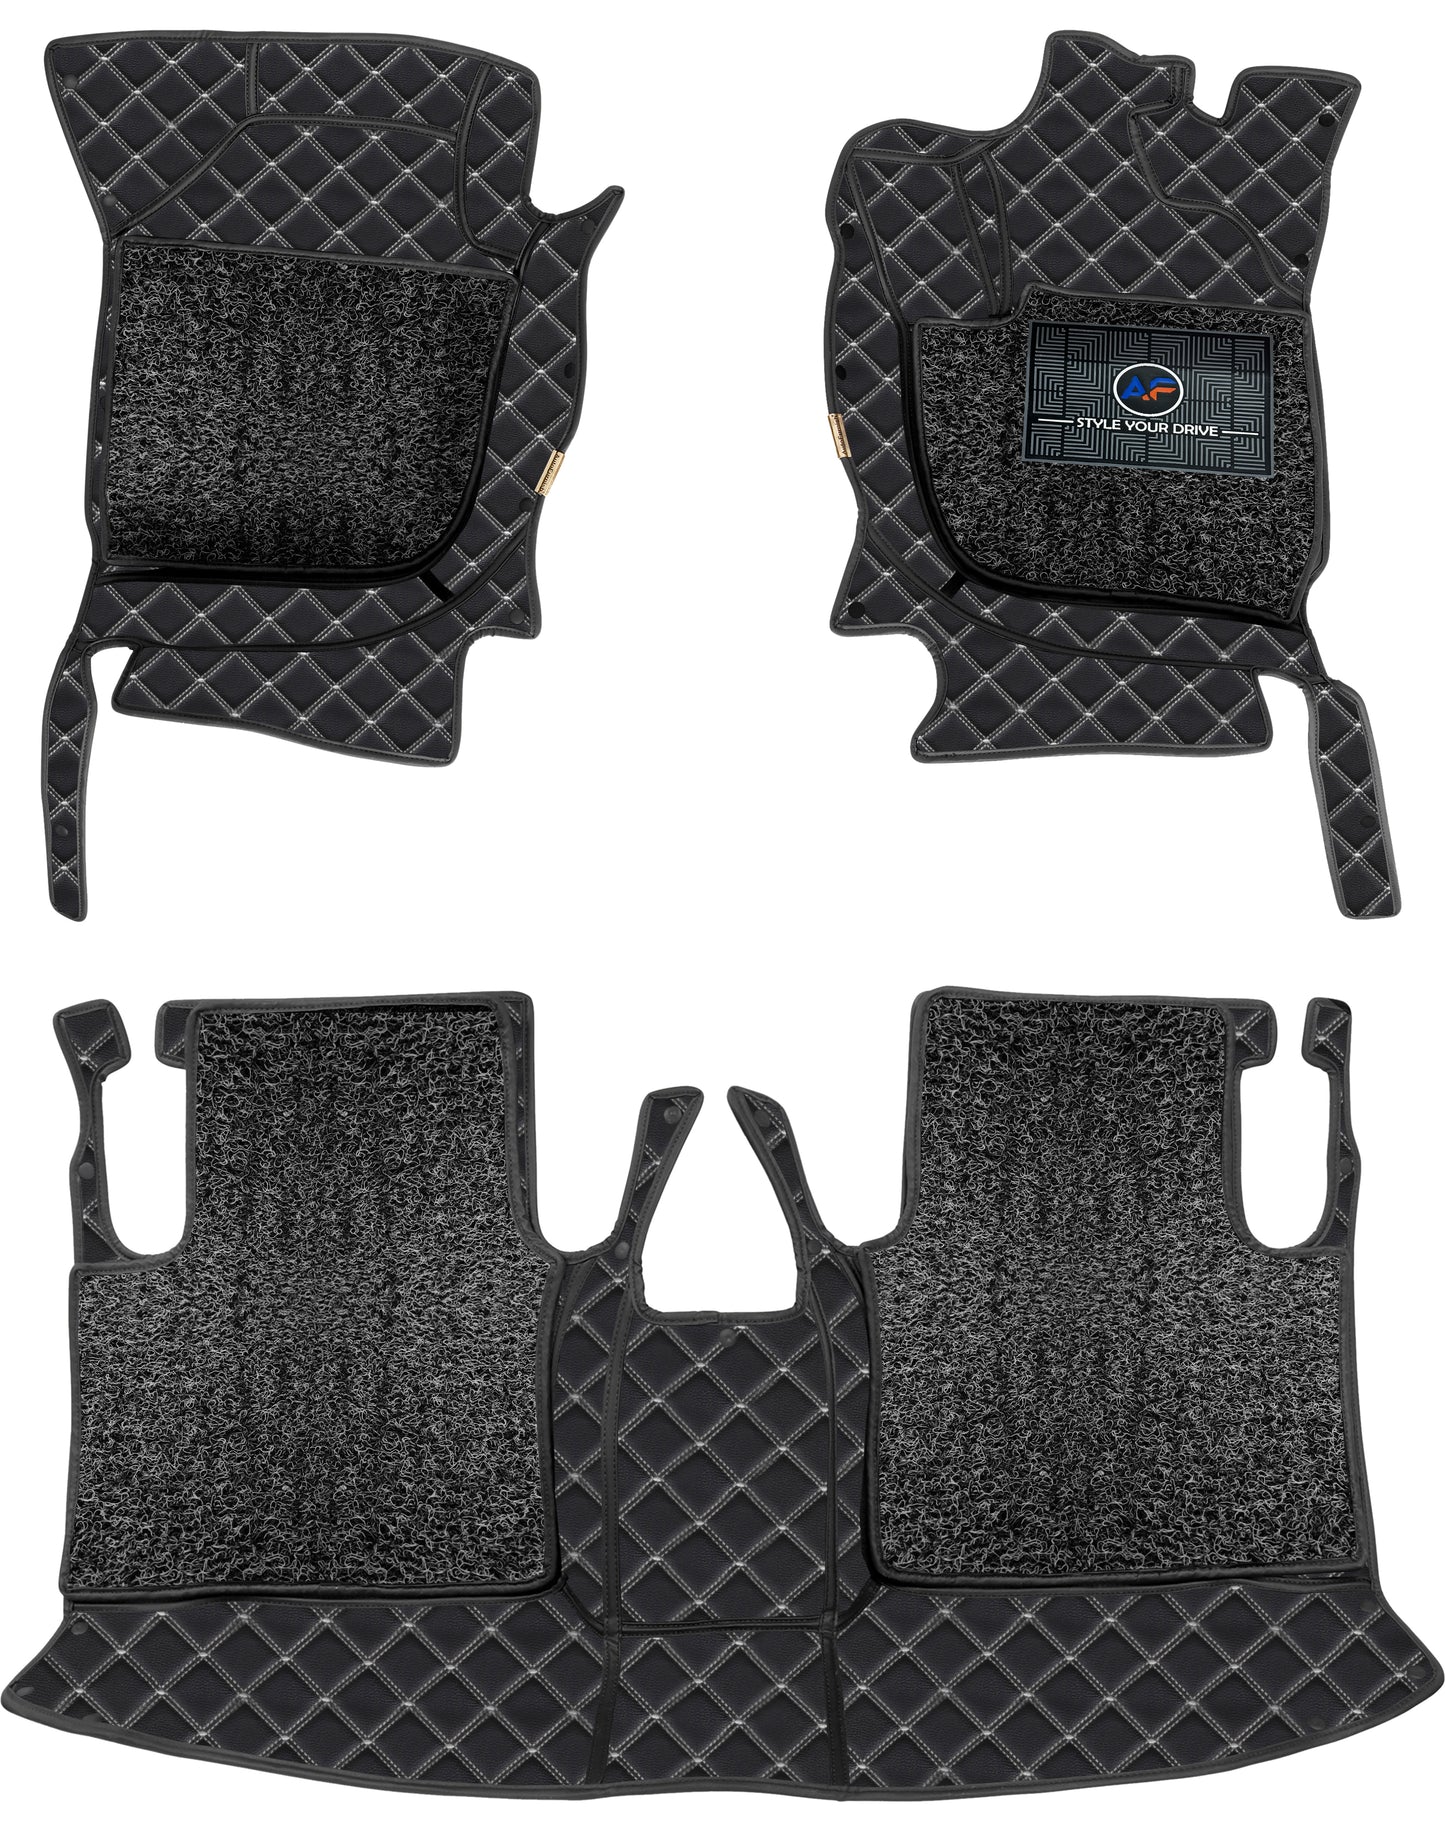 Tata Safari Storme 2012-19-7D Luxury Car Mat, All Weather Proof, Anti-Skid, 100% Waterproof & Odorless with Unique Diamond Fish Design (24mm Luxury PU Leather, 2 Rows)